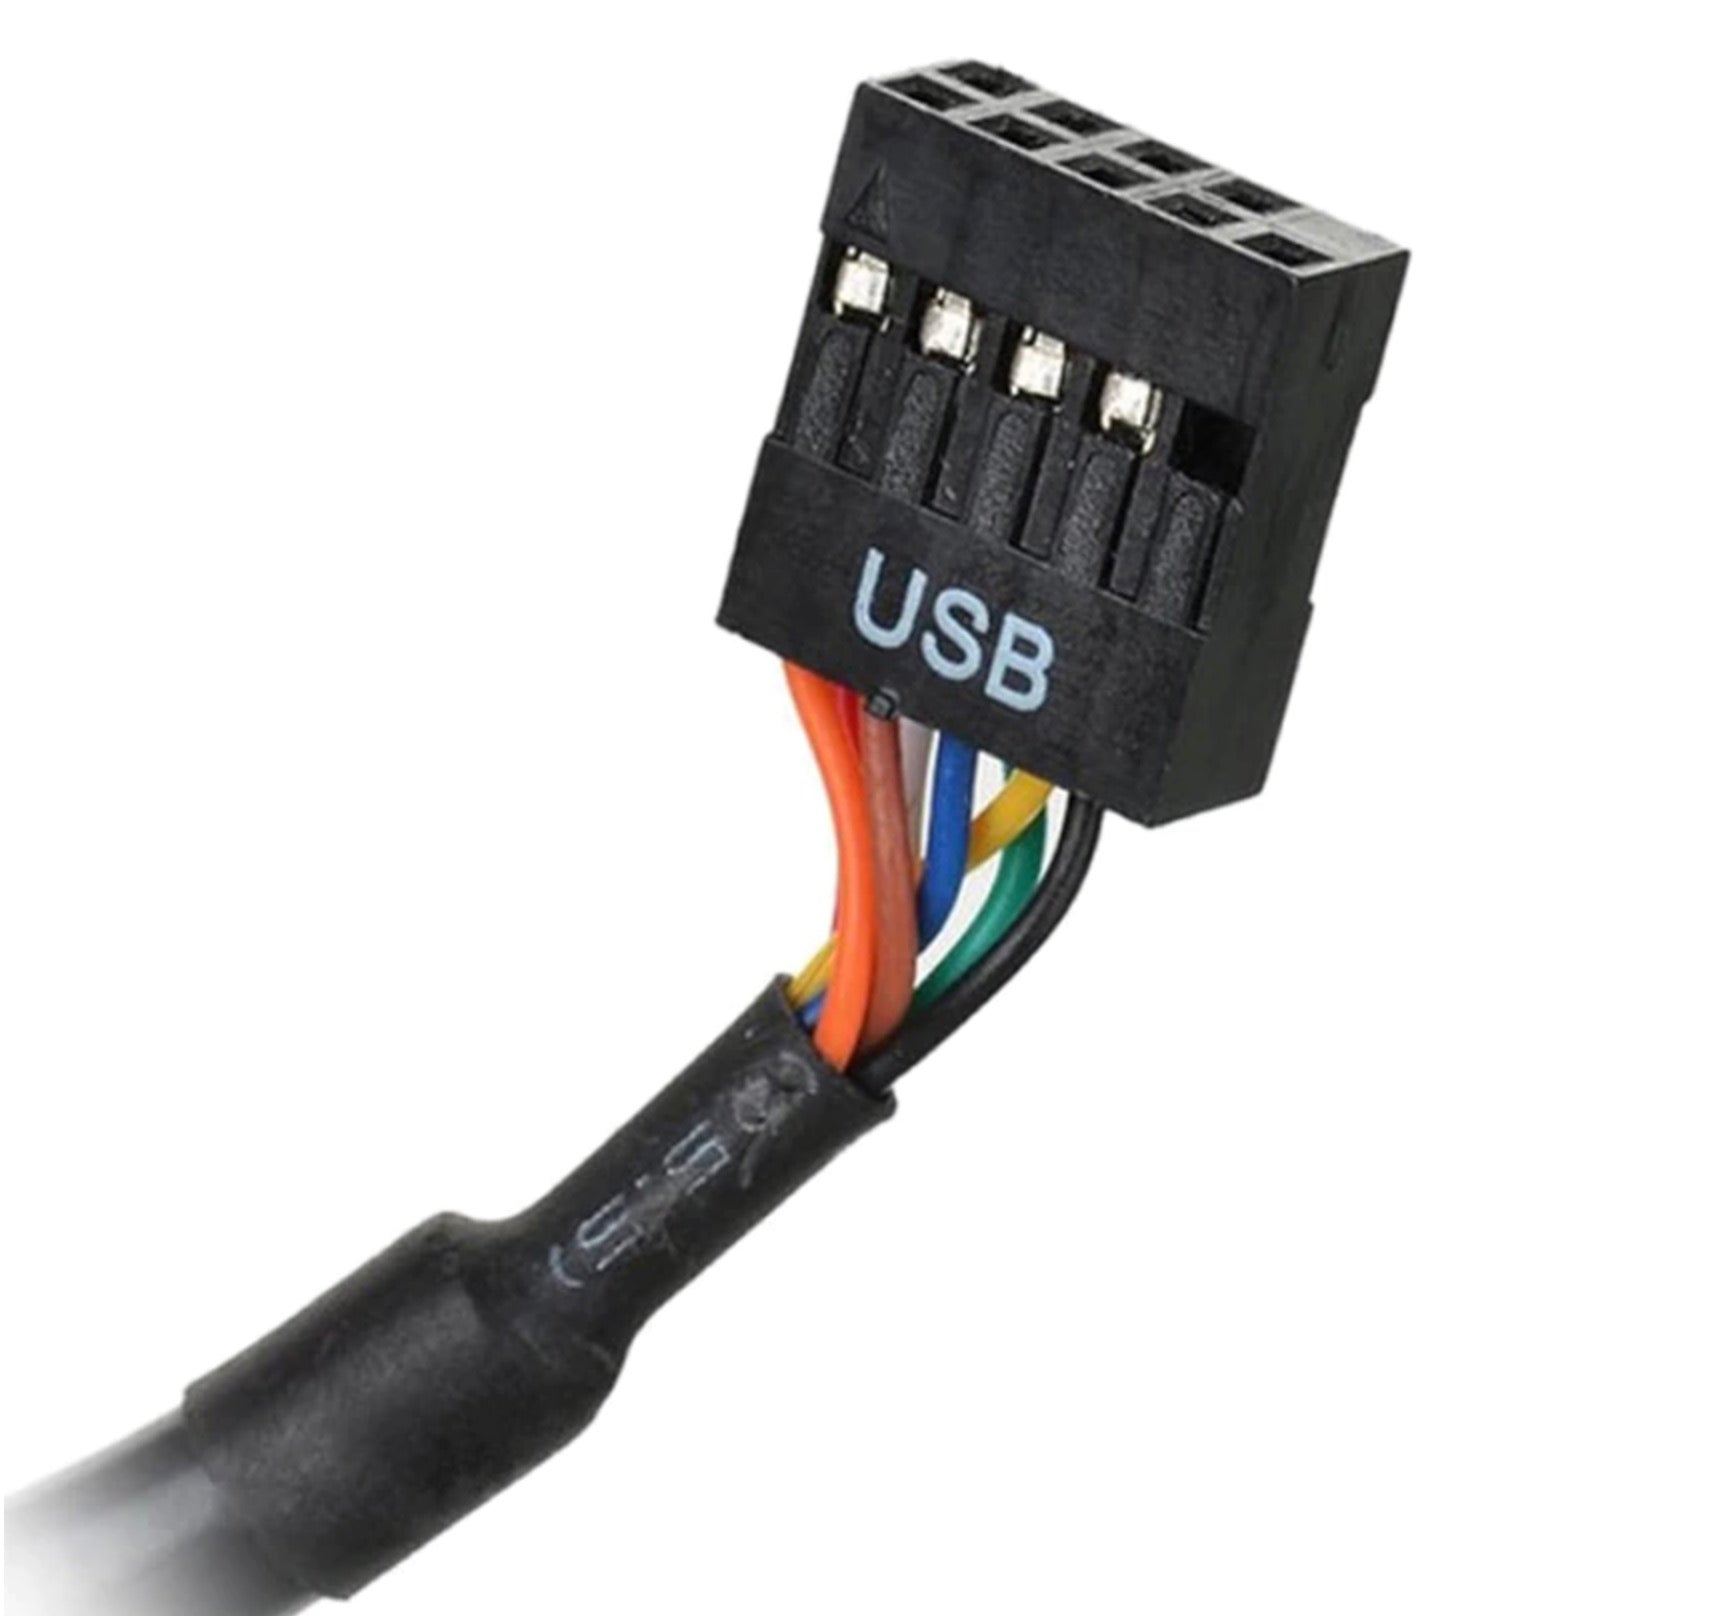 USB 3.0 Motherboard Header 19pin Male to USB 2.0 9pin Female Adapter Cable 0.15m